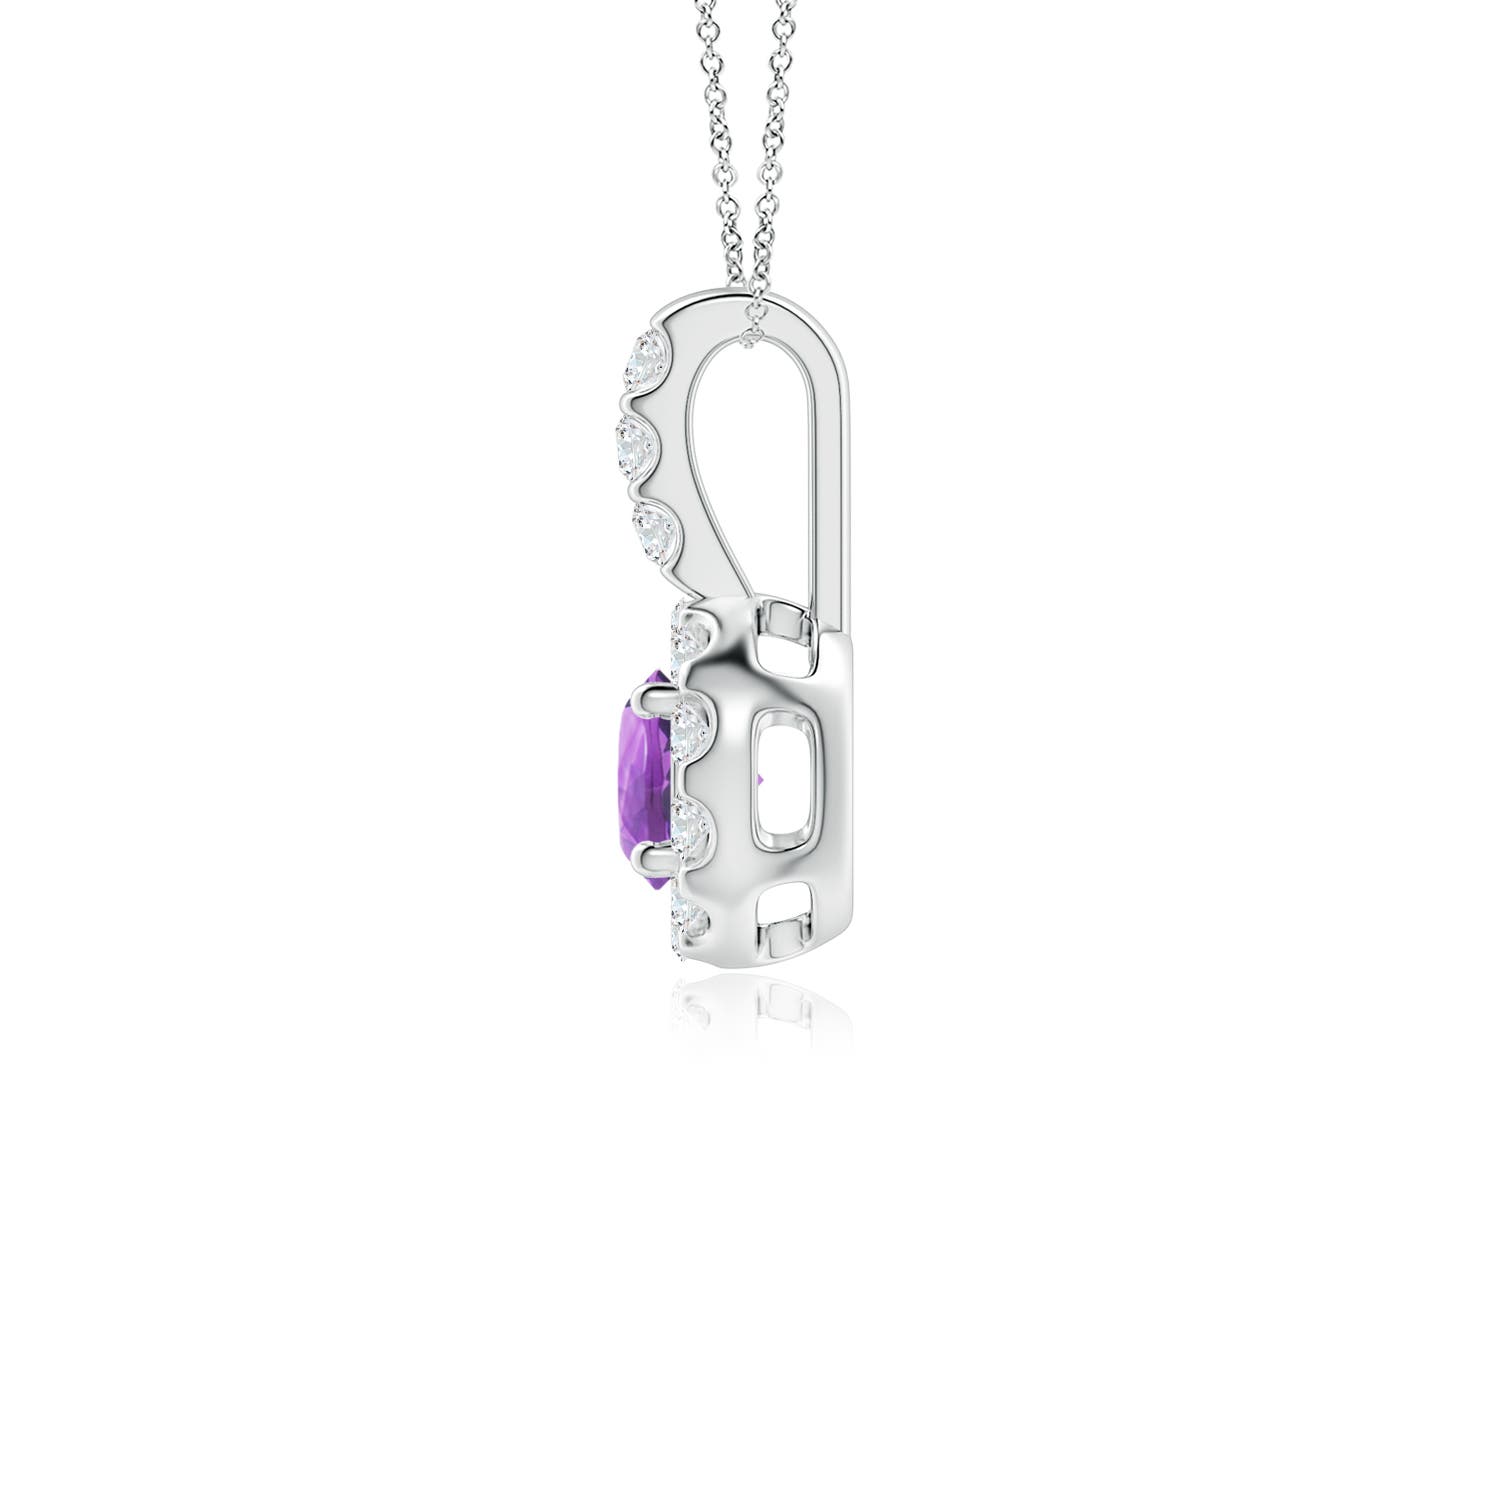 A - Amethyst / 0.38 CT / 14 KT White Gold